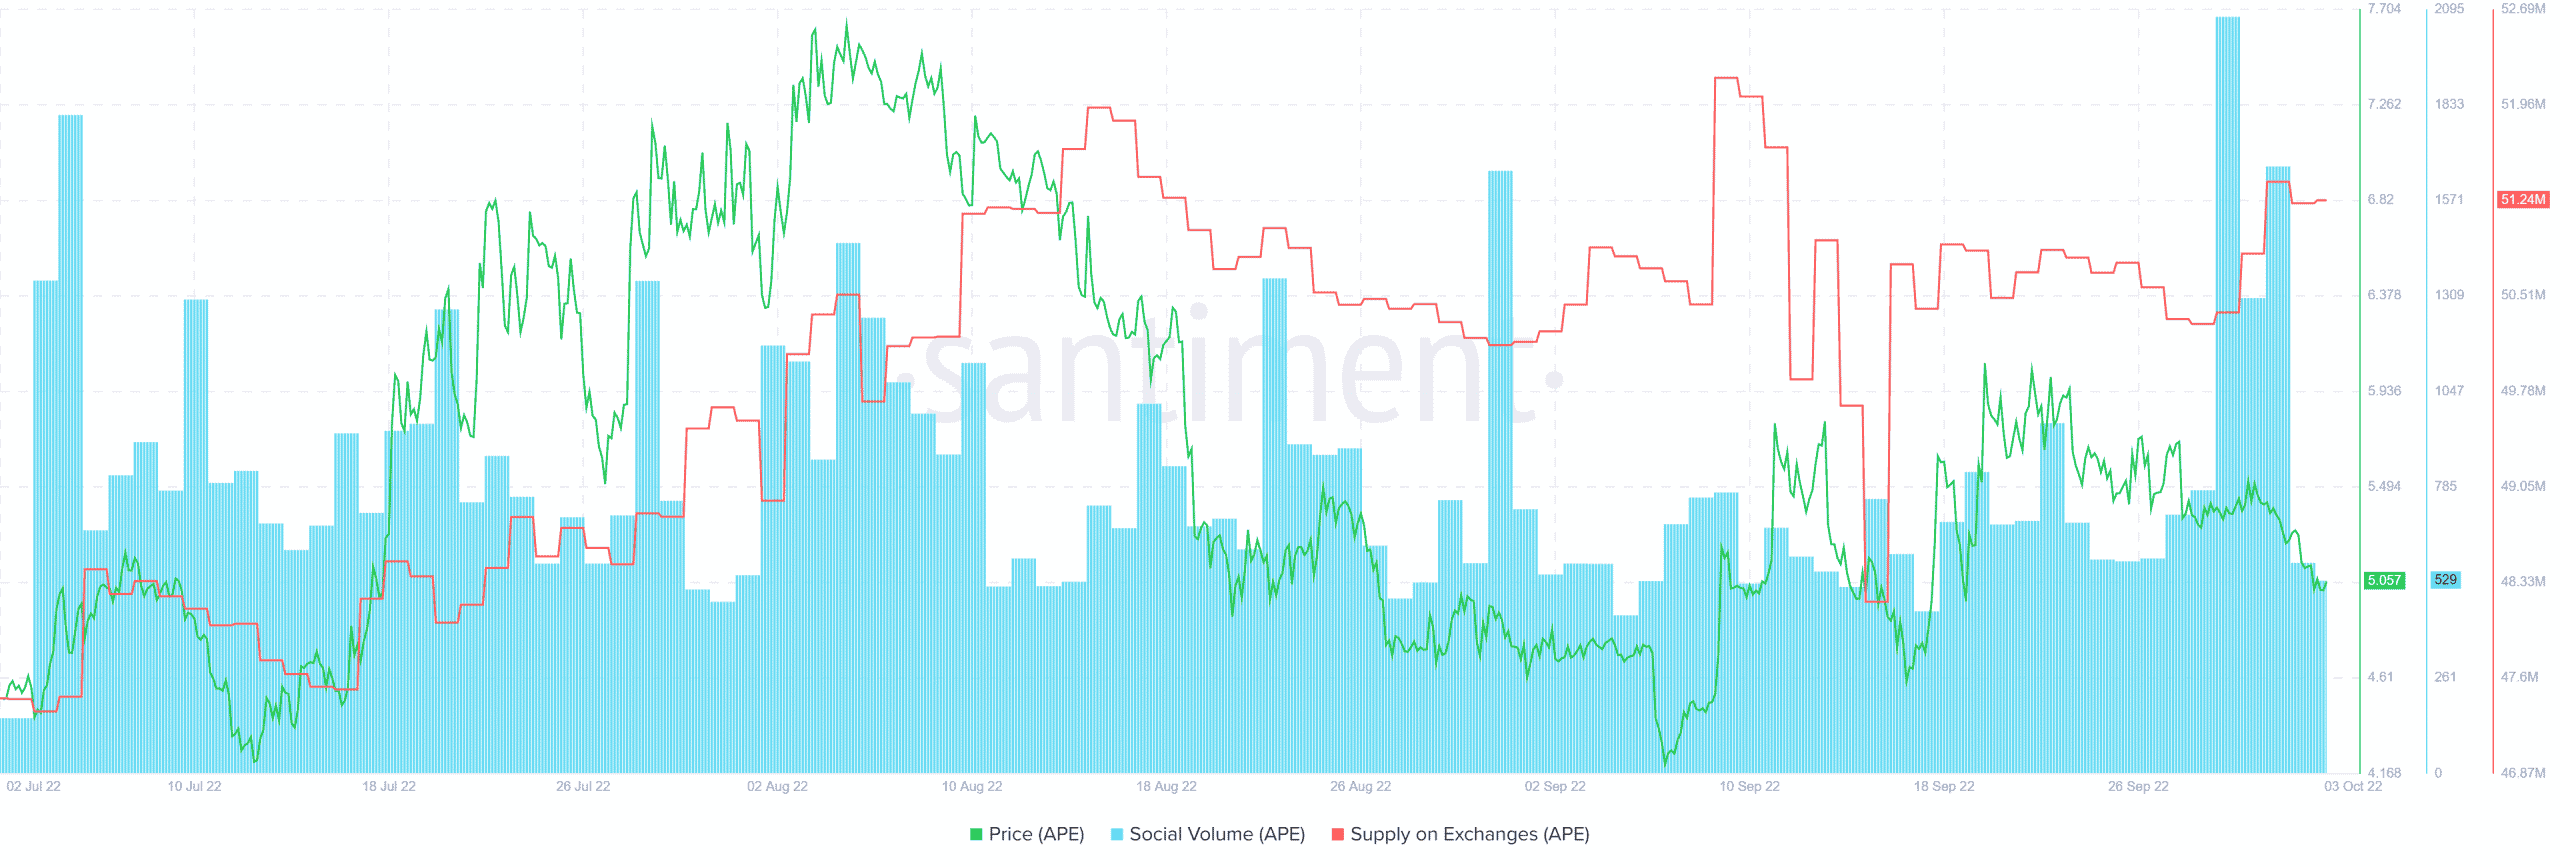 ApeCoin at $5 psychological support- will buyers turn up this week?